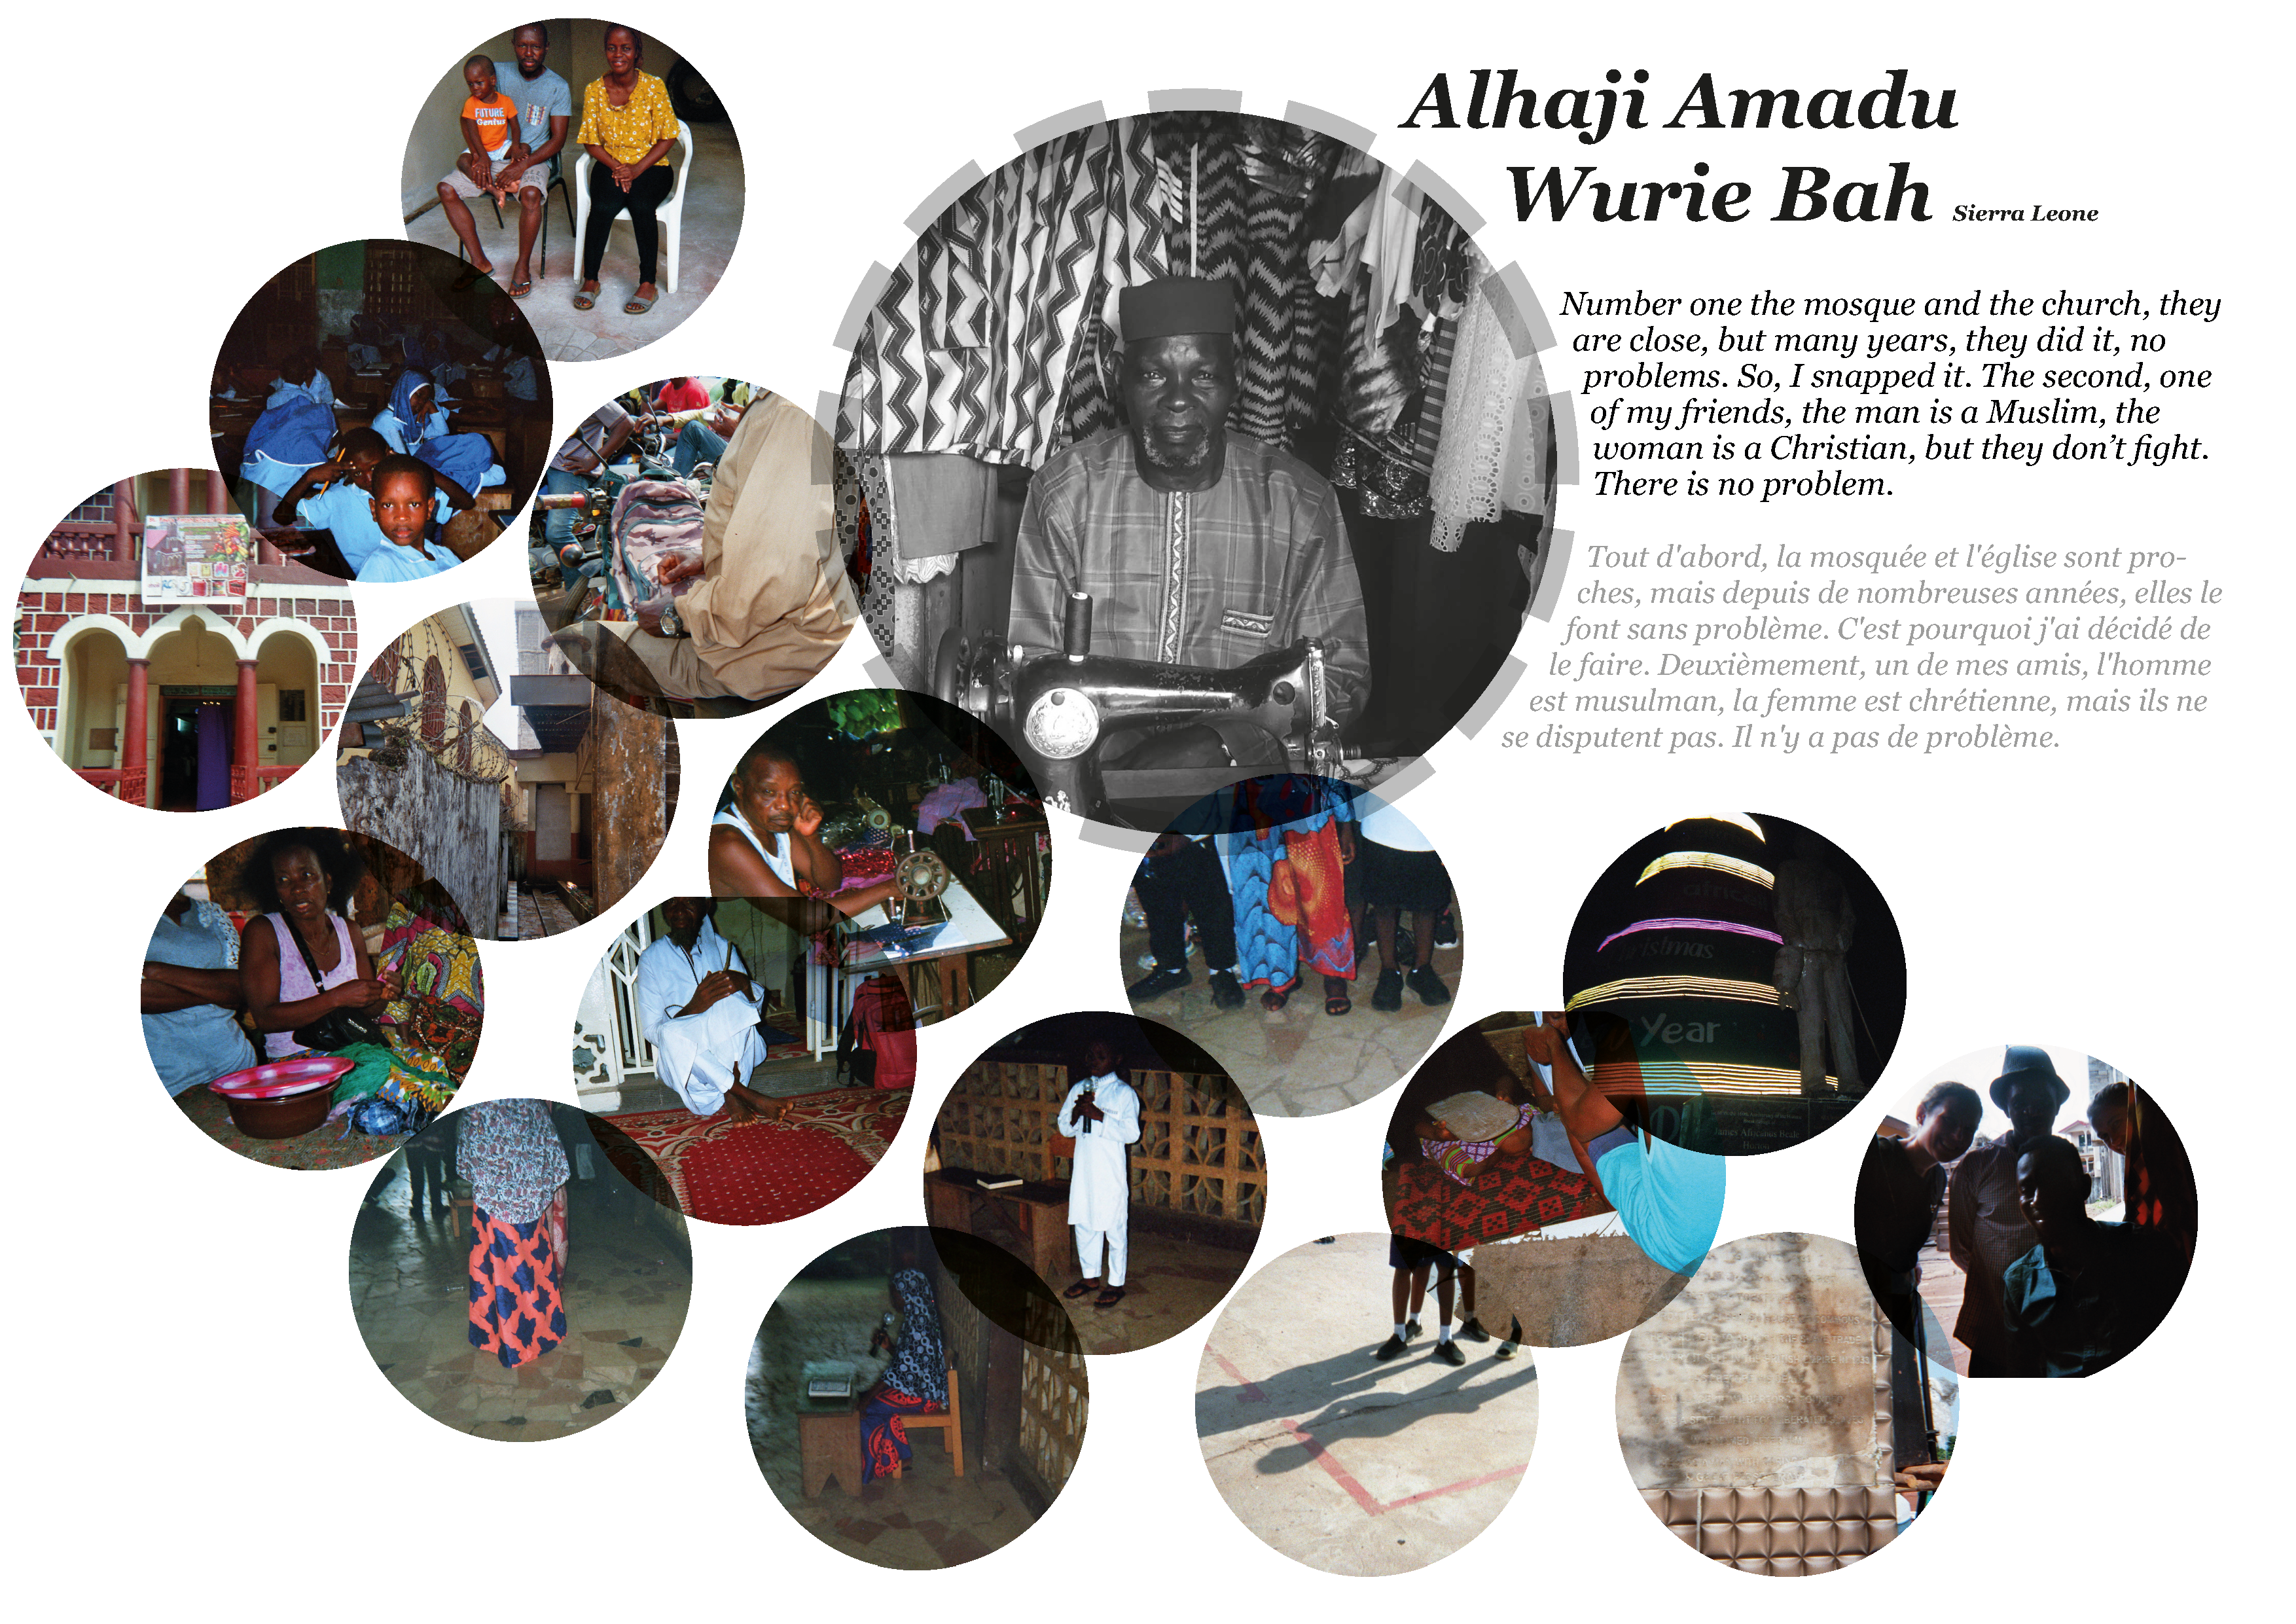 Collage of pictures of religion and peace by Alhaji Amadu Wurie Bah in Sierra Leone